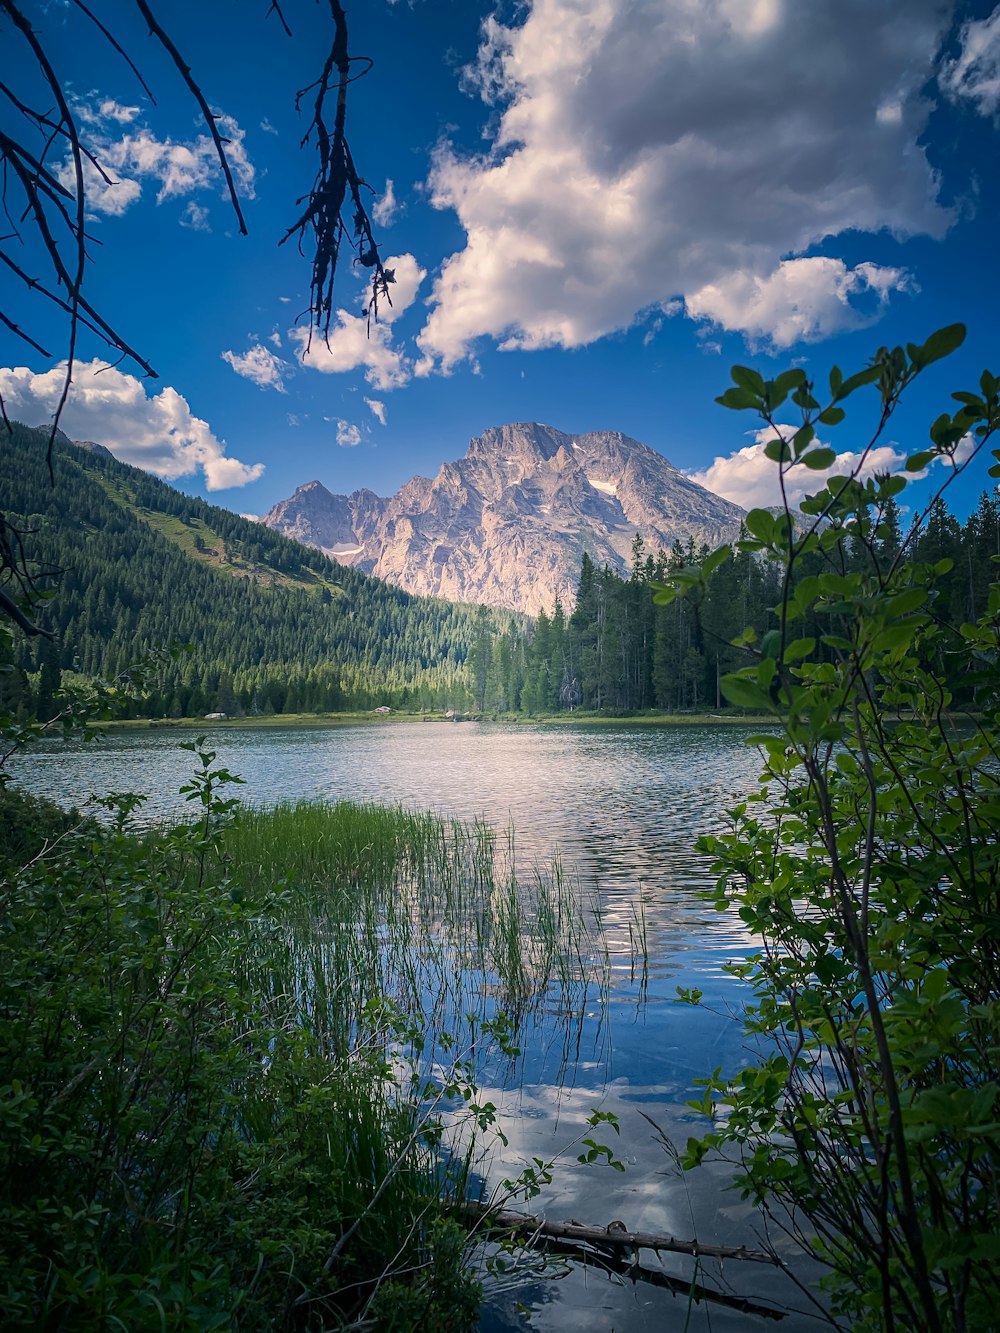 a lake surrounded by trees and mountains under a cloudy blue sky